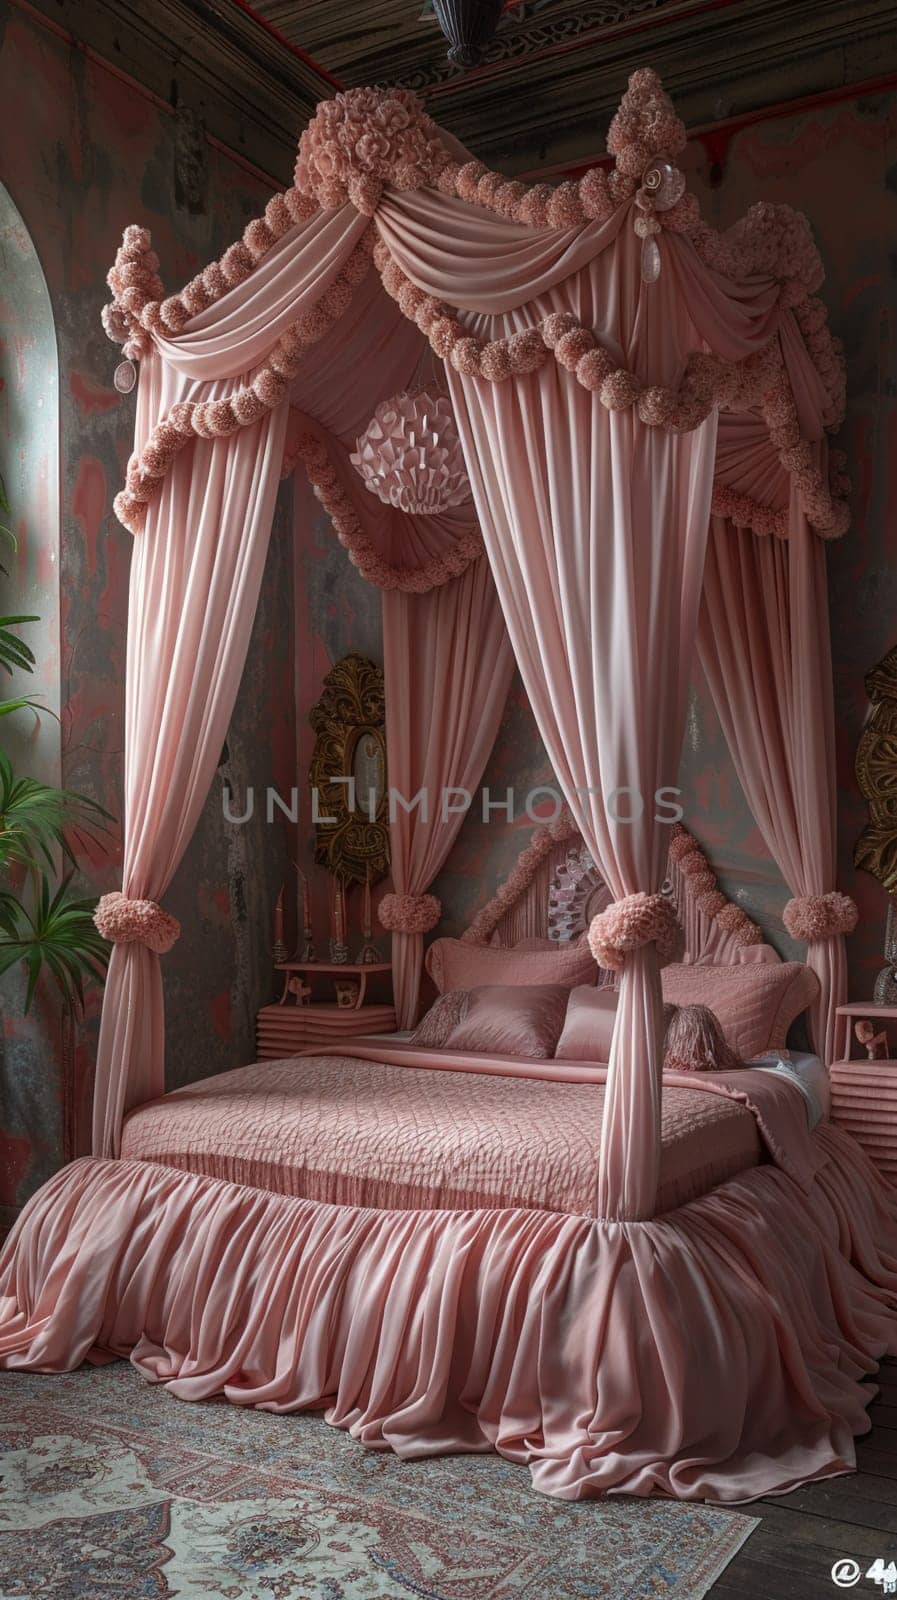 Fairy-tale princess bedroom with a canopy bed and whimsical decor.